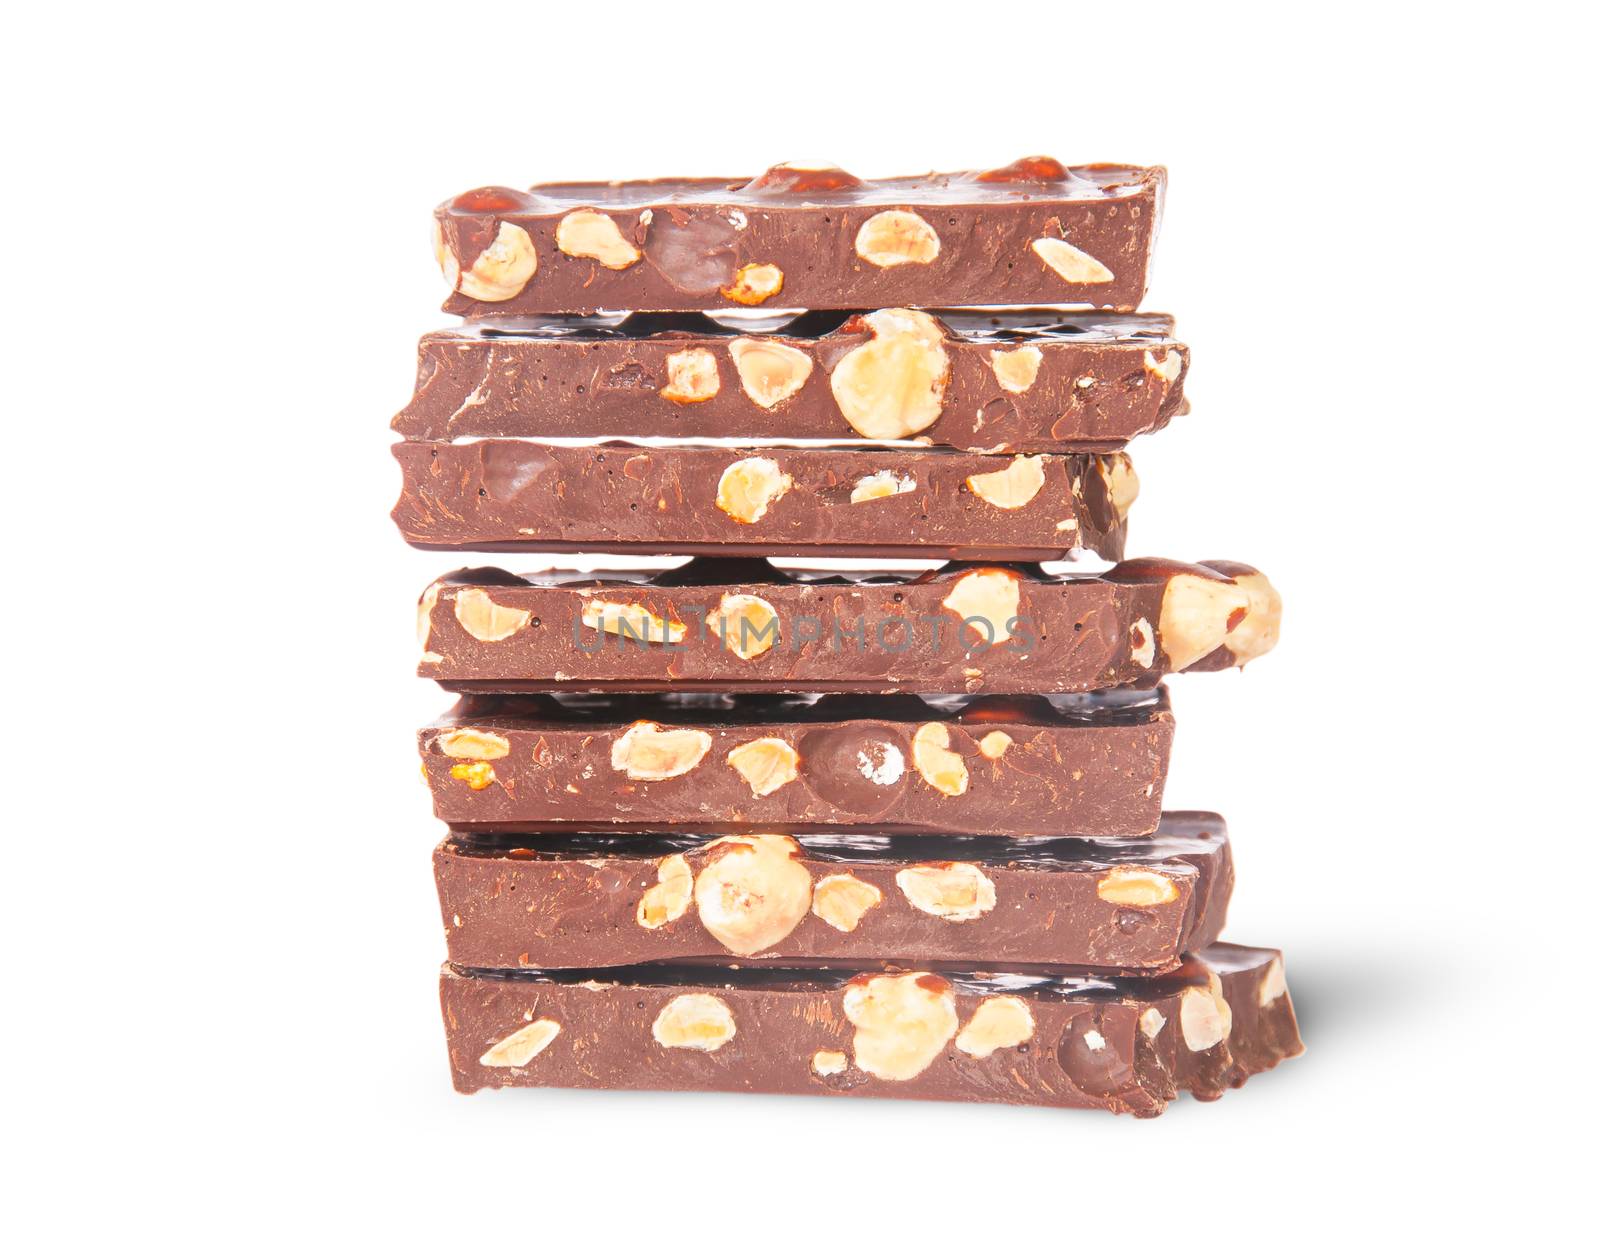 In front stack of seven chocolate bars by Cipariss